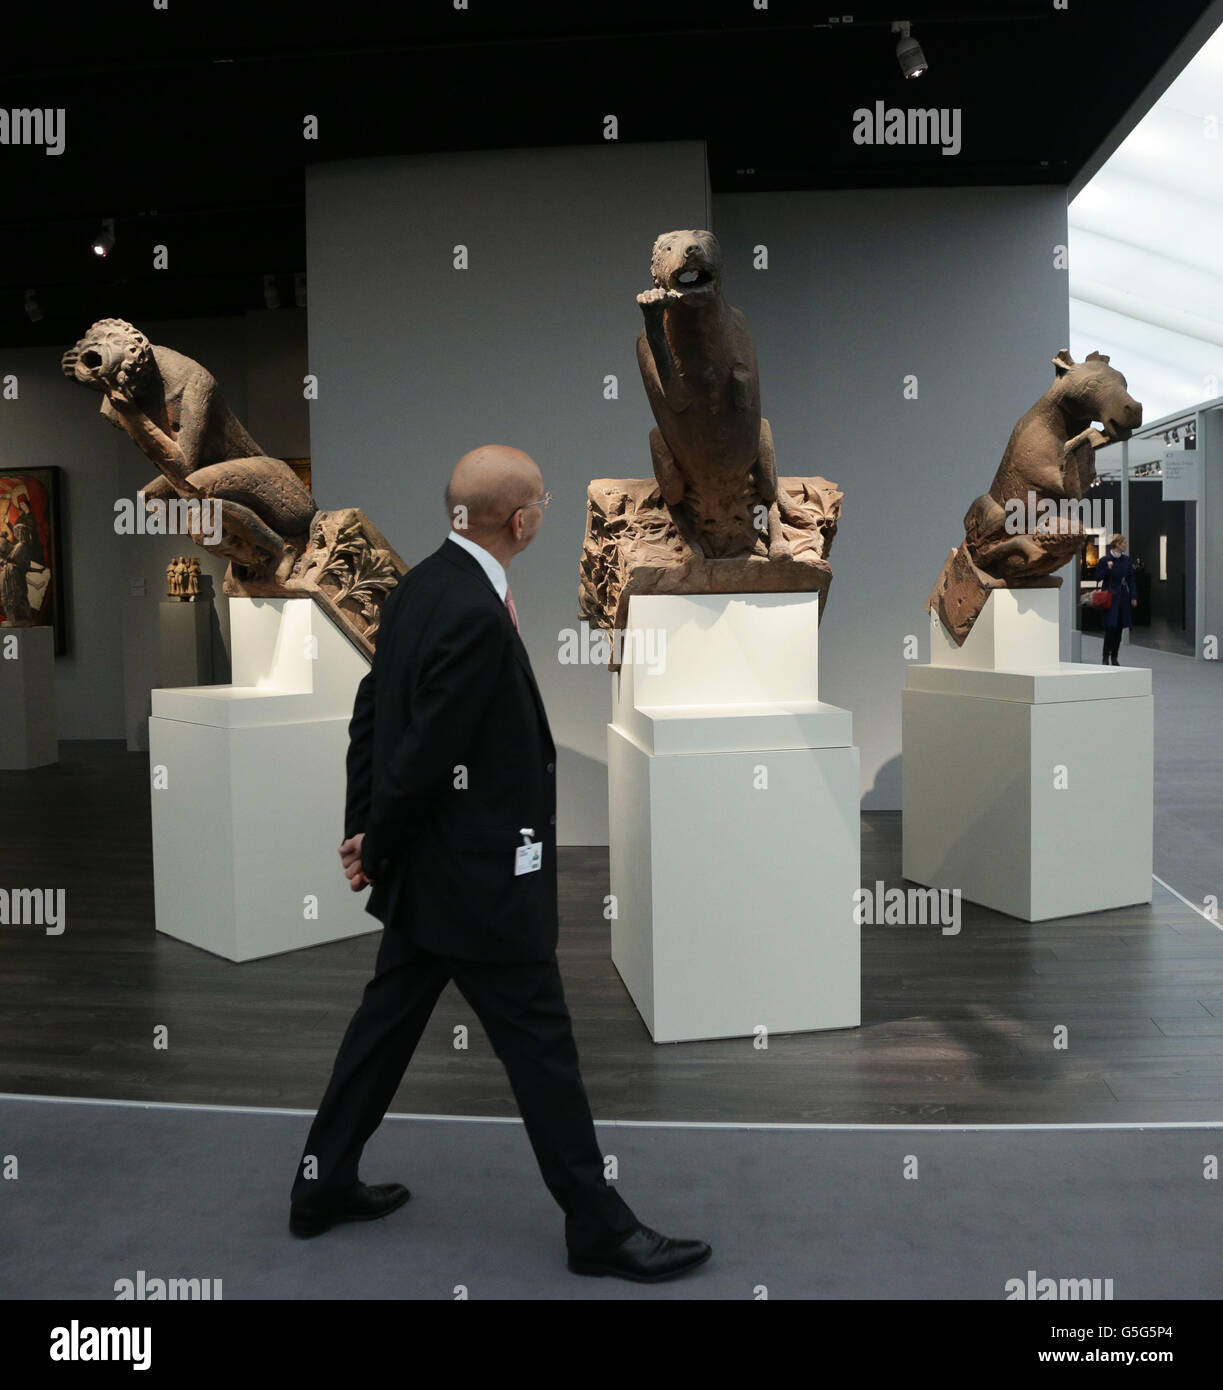 A visitor looks at Three Monumental Gargoyles, taken from the Oeuvre of the Notre-Dame Cathedral in Strasbourg, c.1275-1283, at the Frieze Masters art fair, at Regents Park in central London. Stock Photo